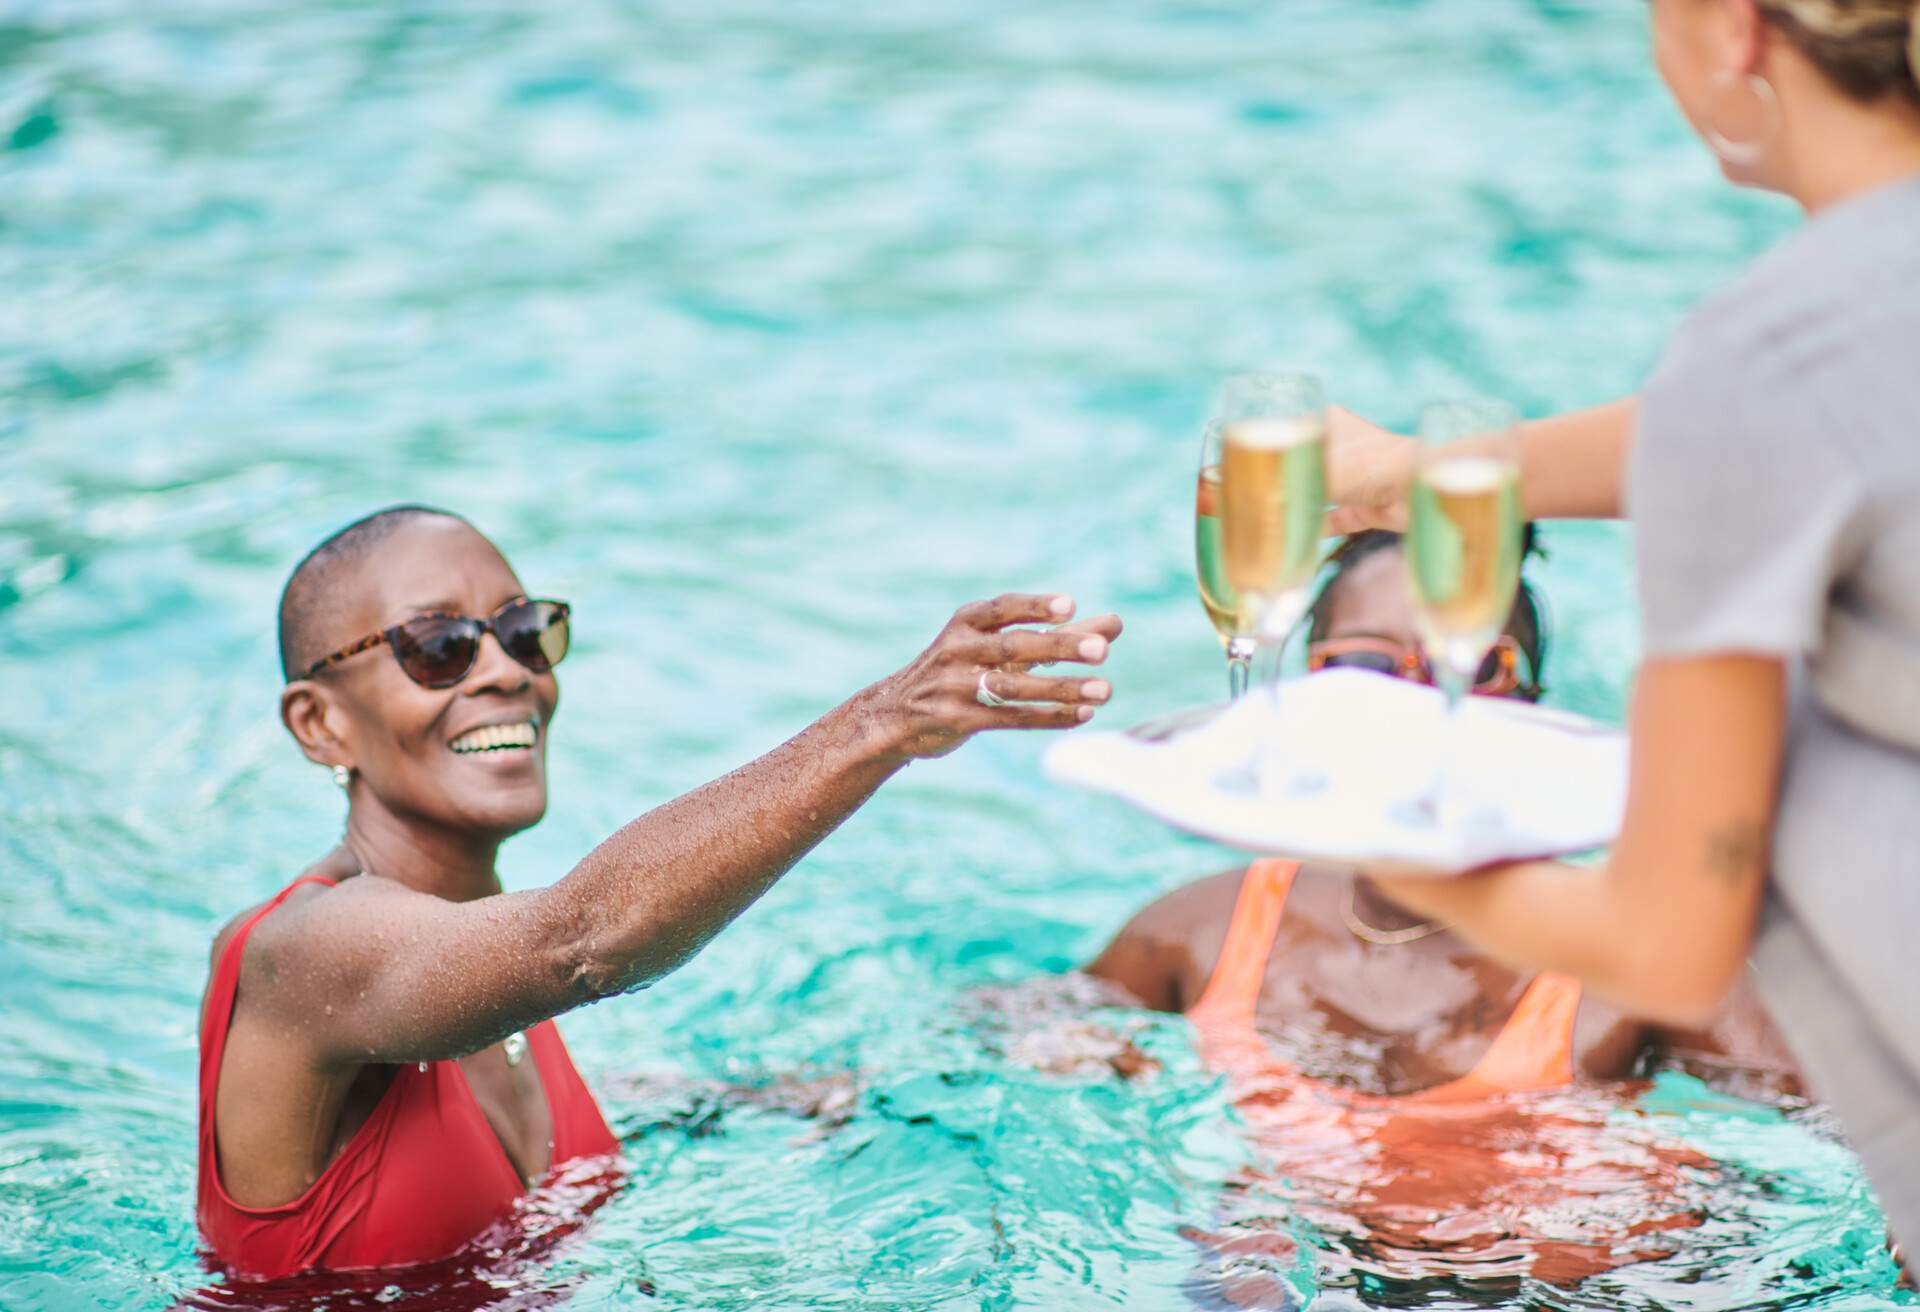 Server bringing champagne flutes to guest at the pool